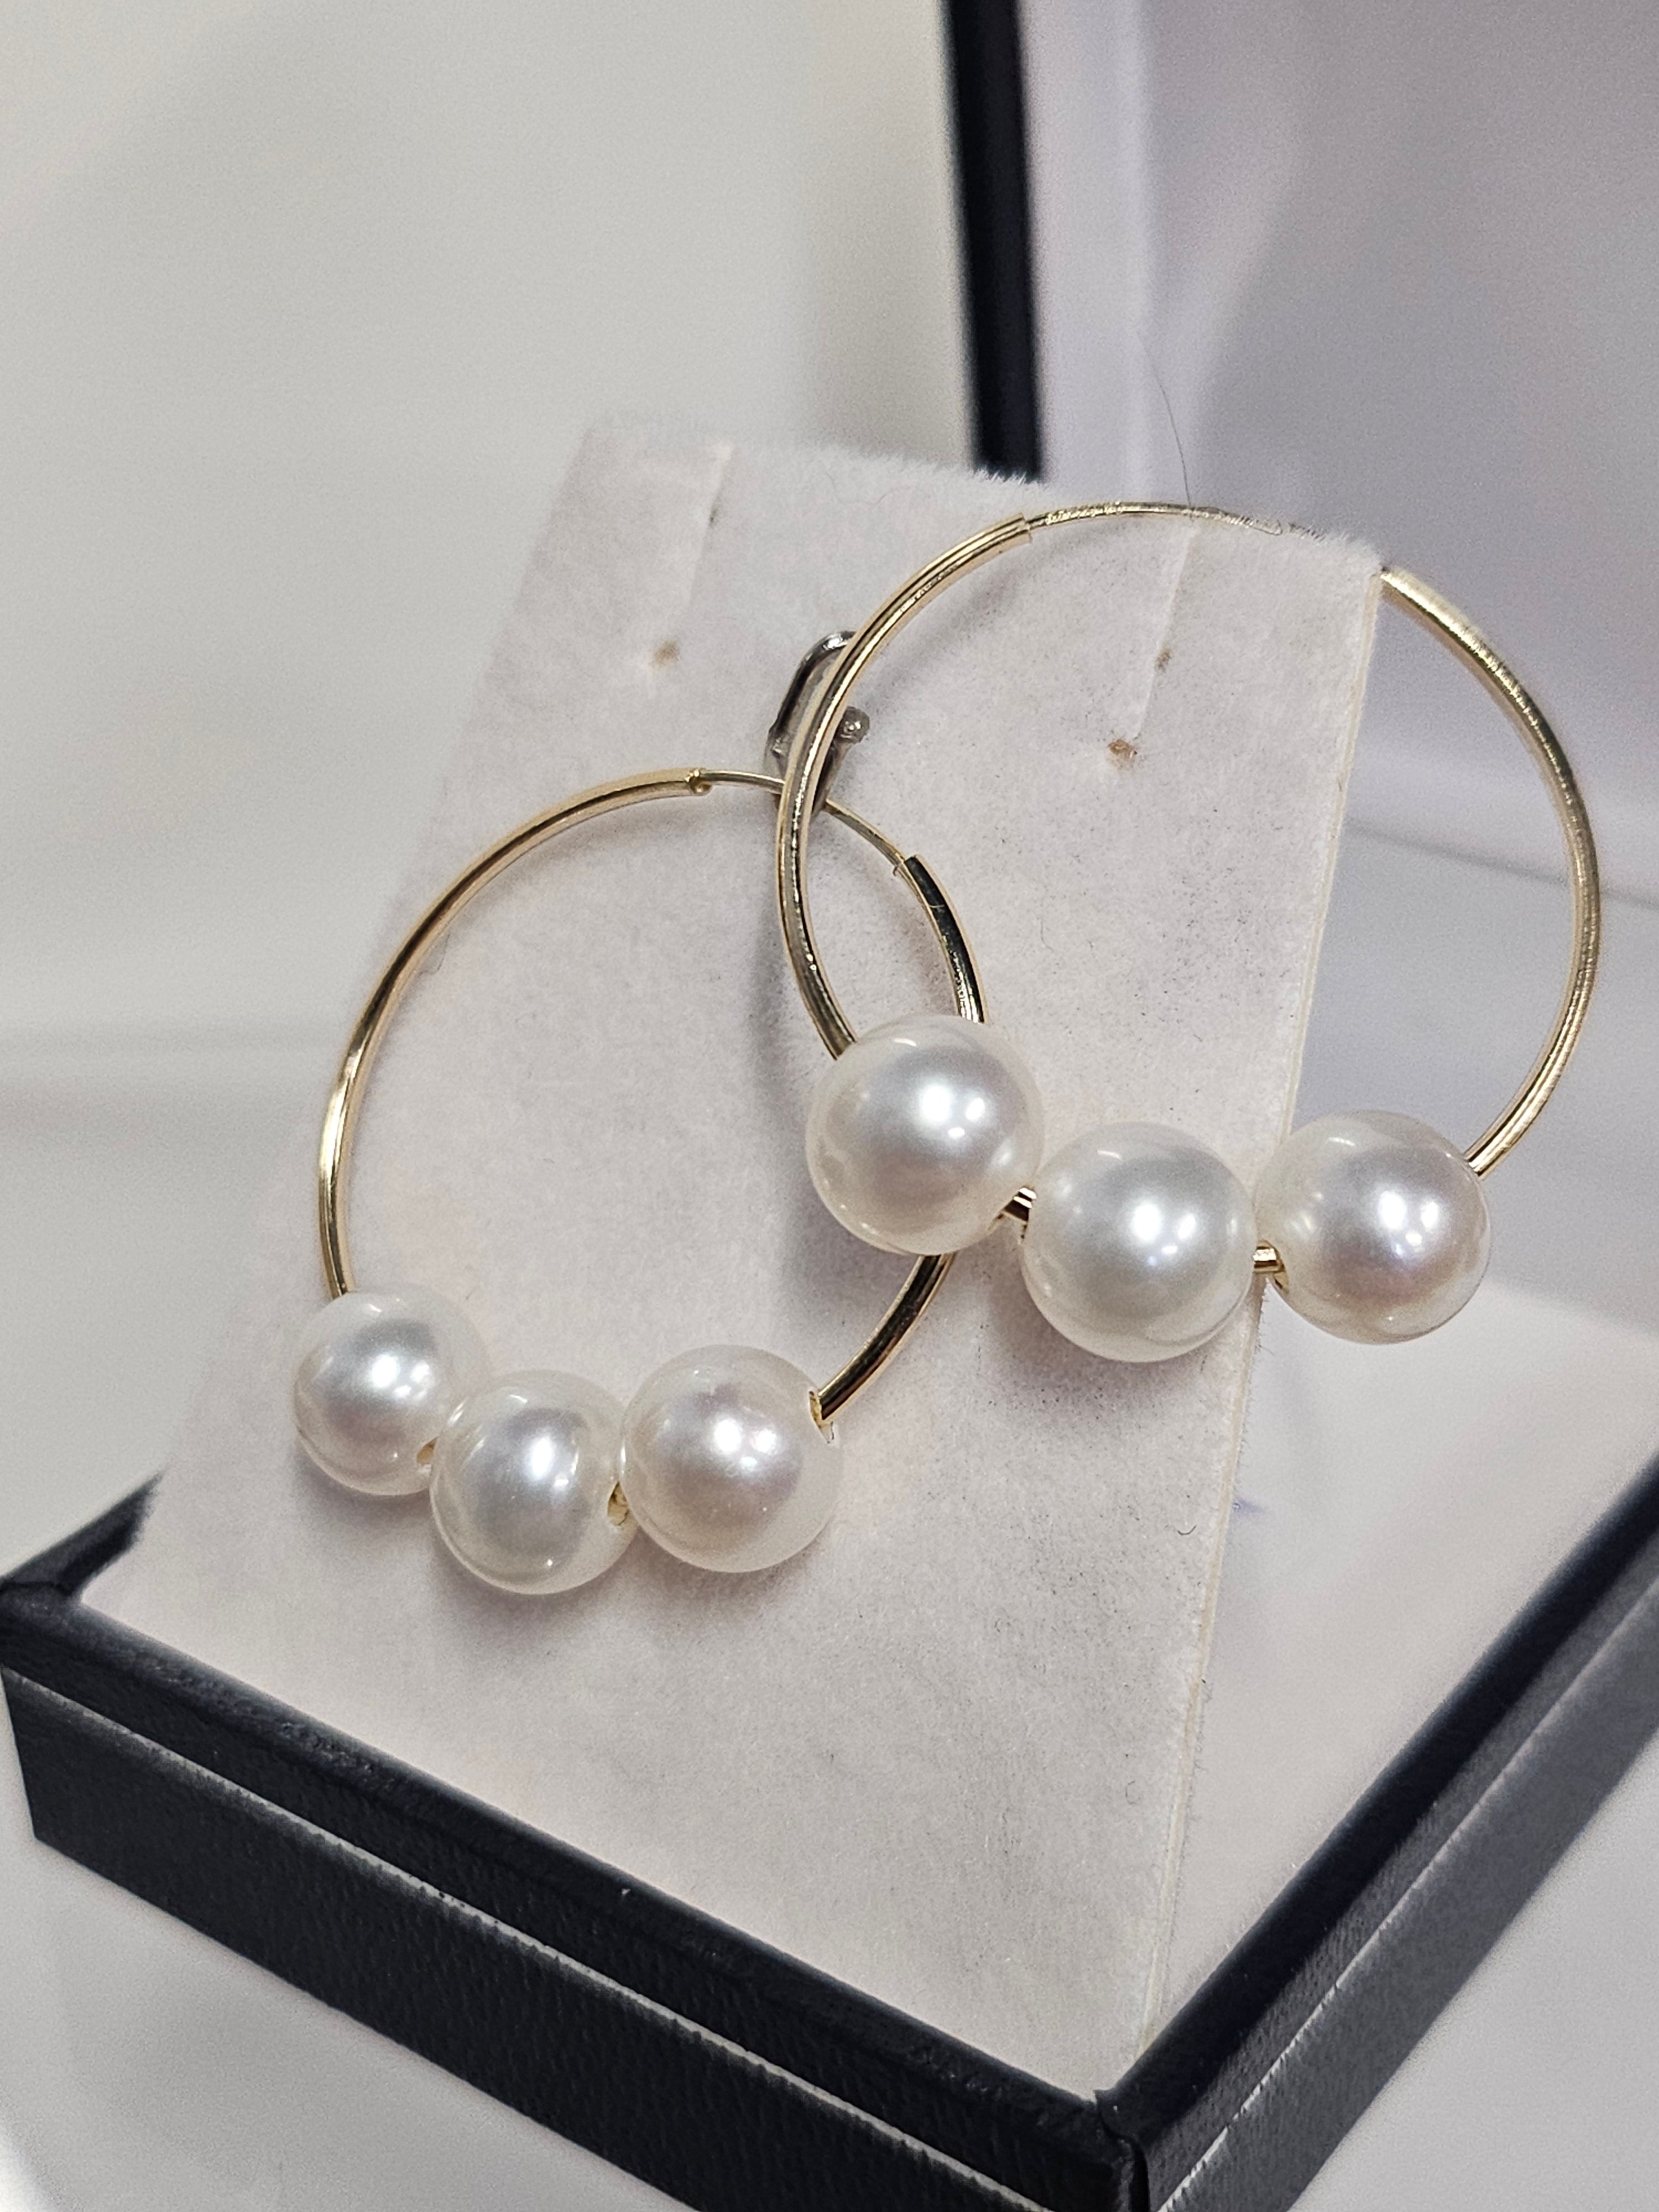 Yellow Gold Hoop Earrings 25mm with Pearls - 14Kt - XF793E